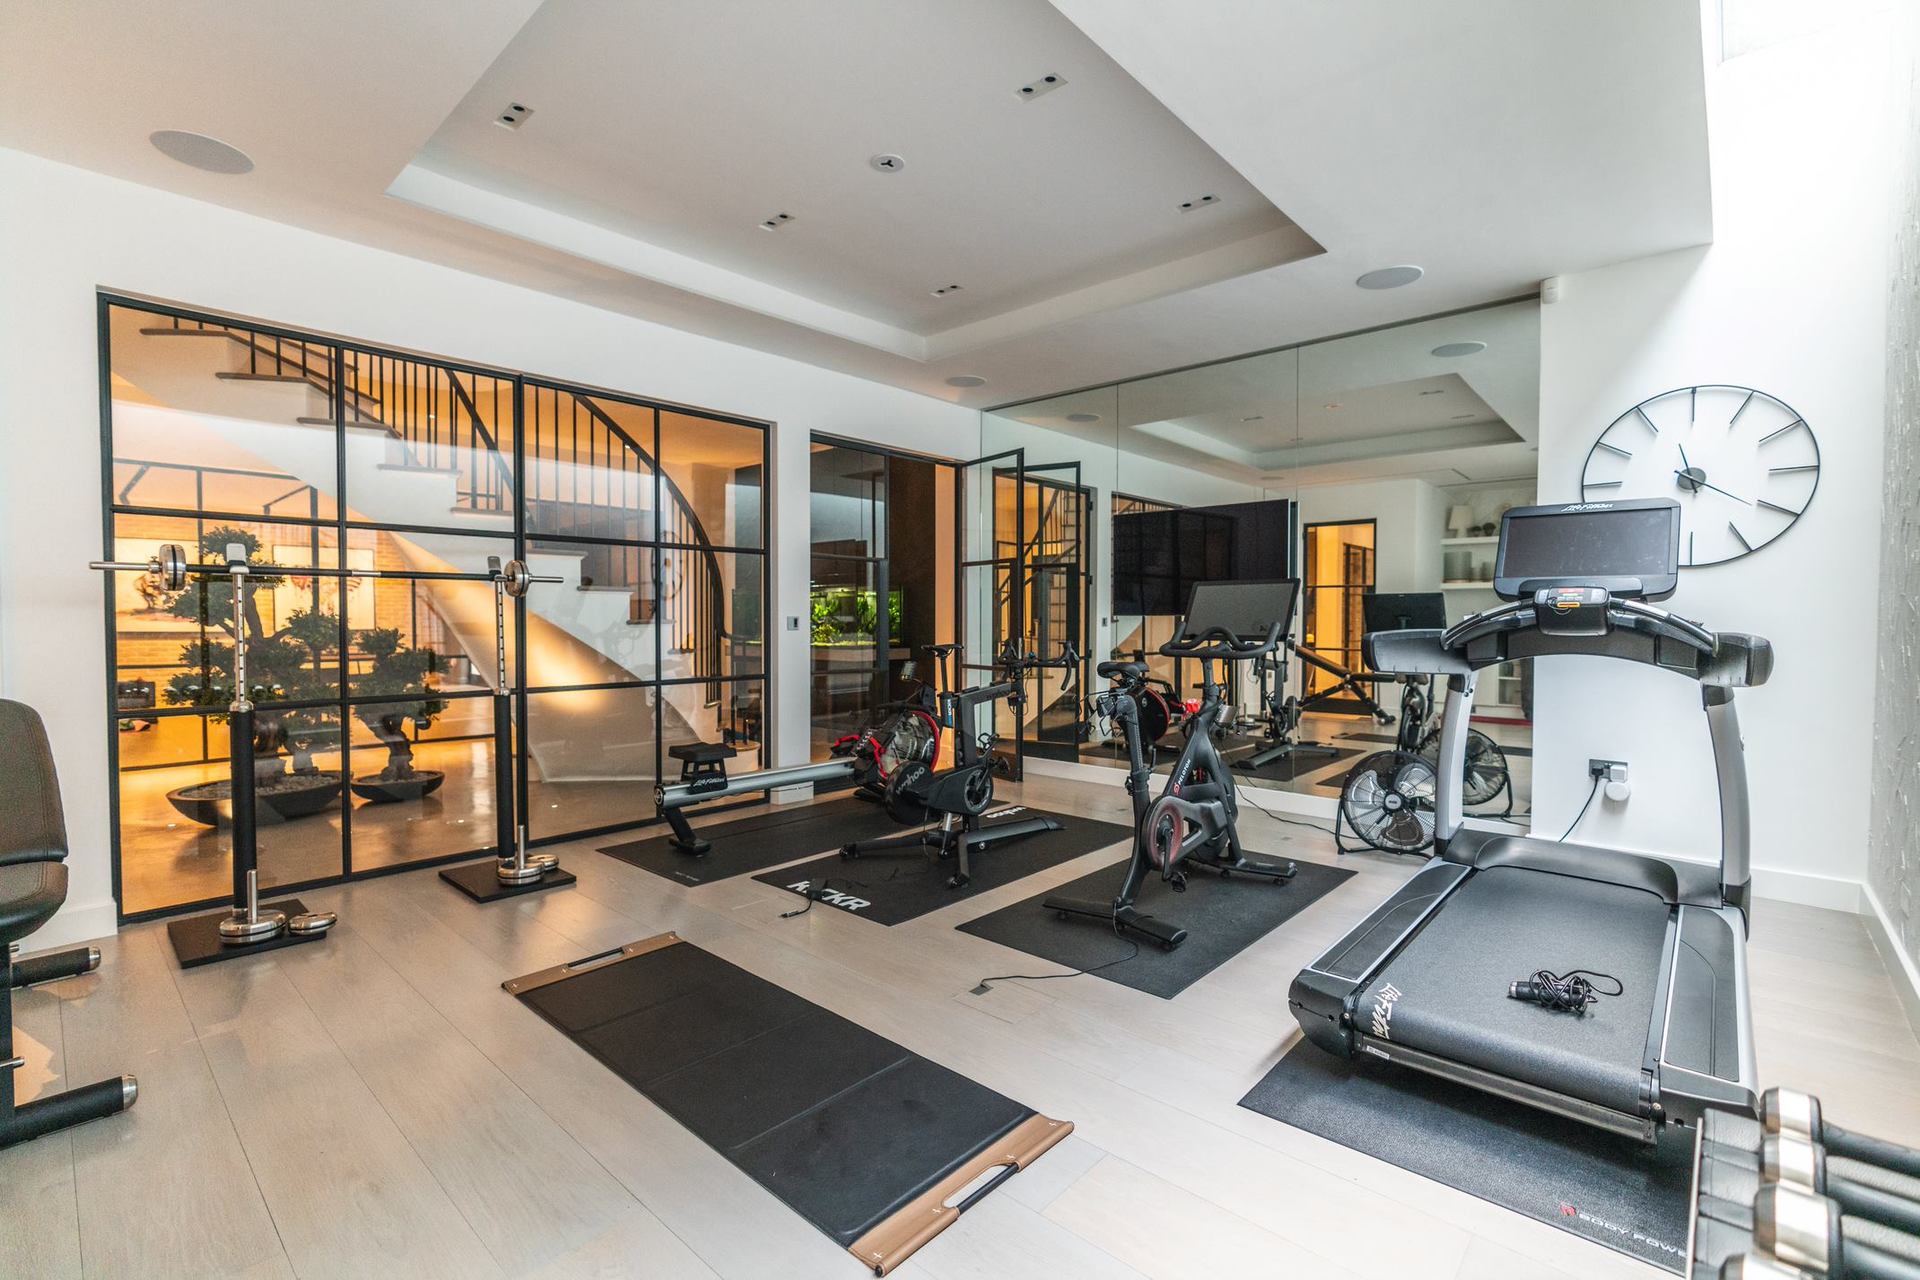 Modern gym with luxury curved staircase shown through glass in background